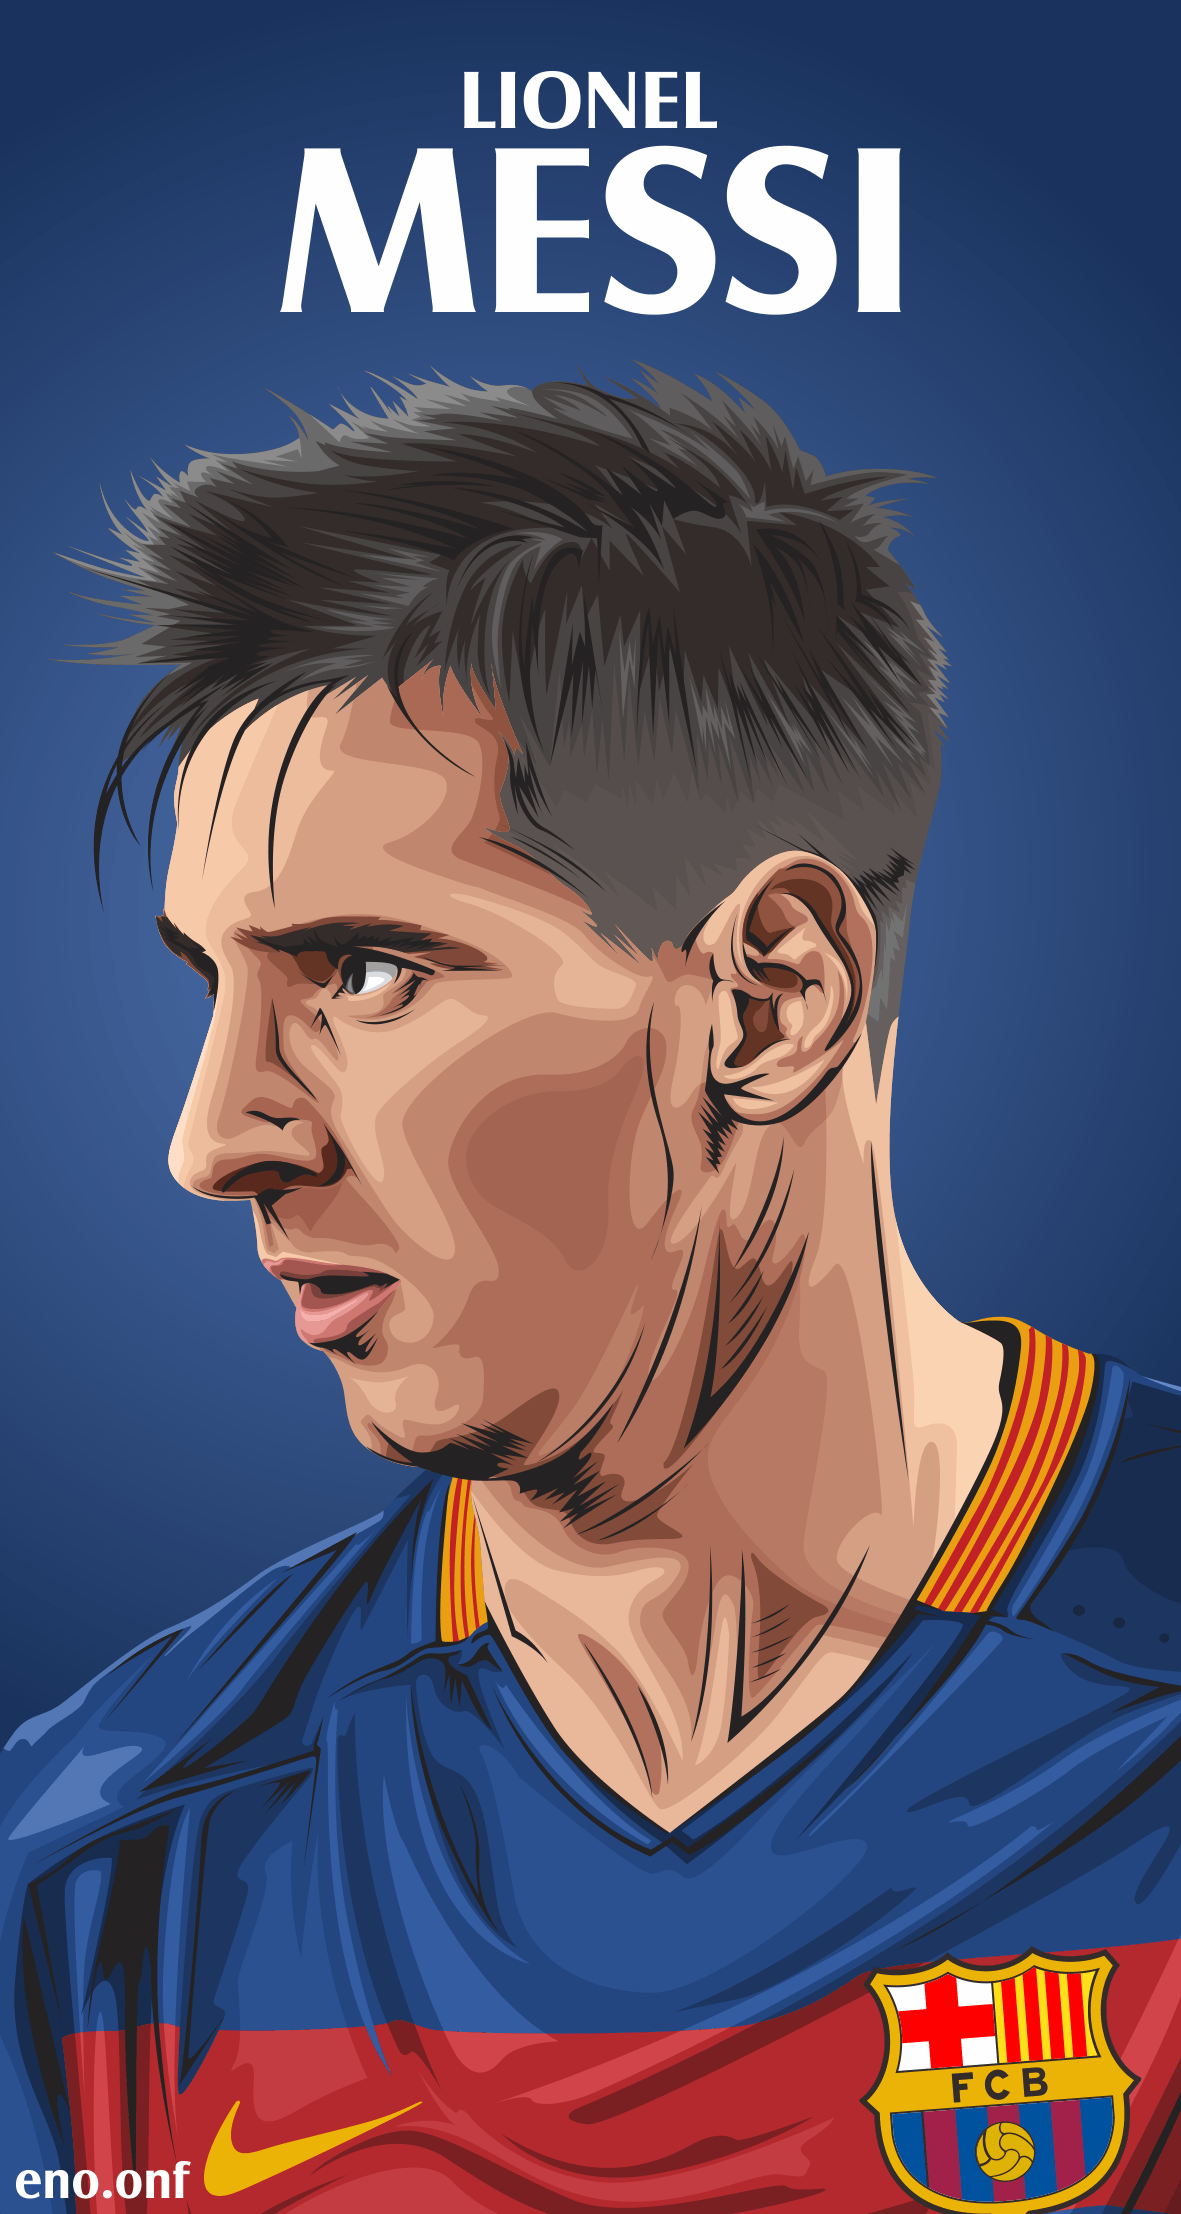 Lionel Messi Digital Art Wallpaper, HD Sports 4K Wallpapers, Images and  Background - Wallpapers Den